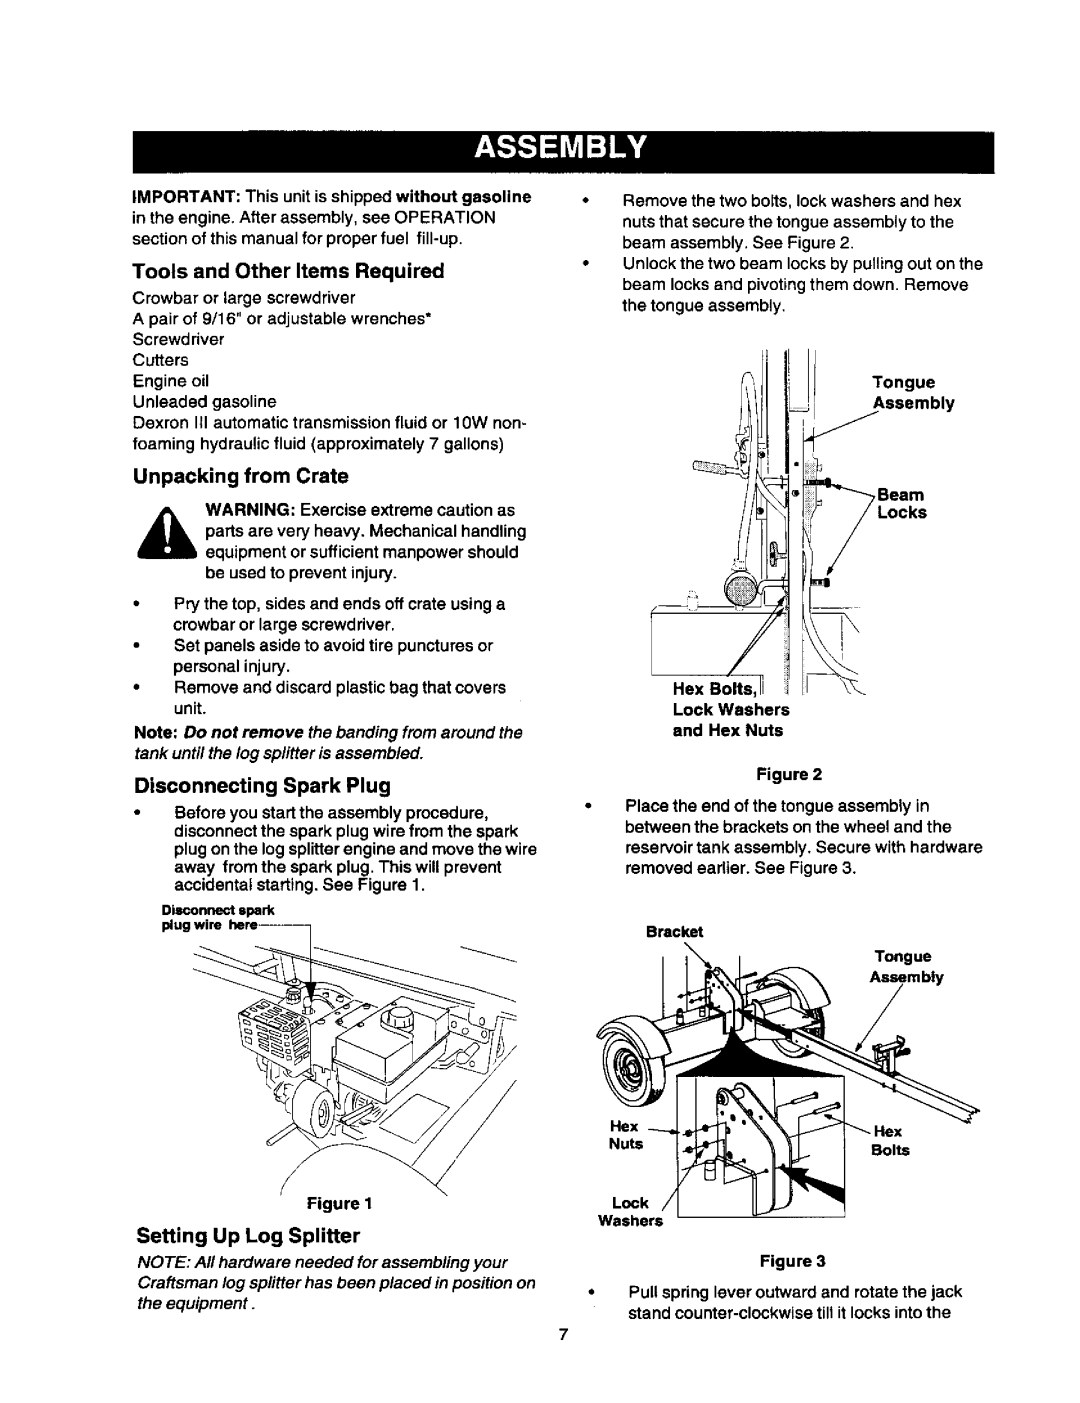 Craftsman 247.79452 owner manual Tools and Other Items Required, Unpacking from Crate, Disconnecting Spark Plug 